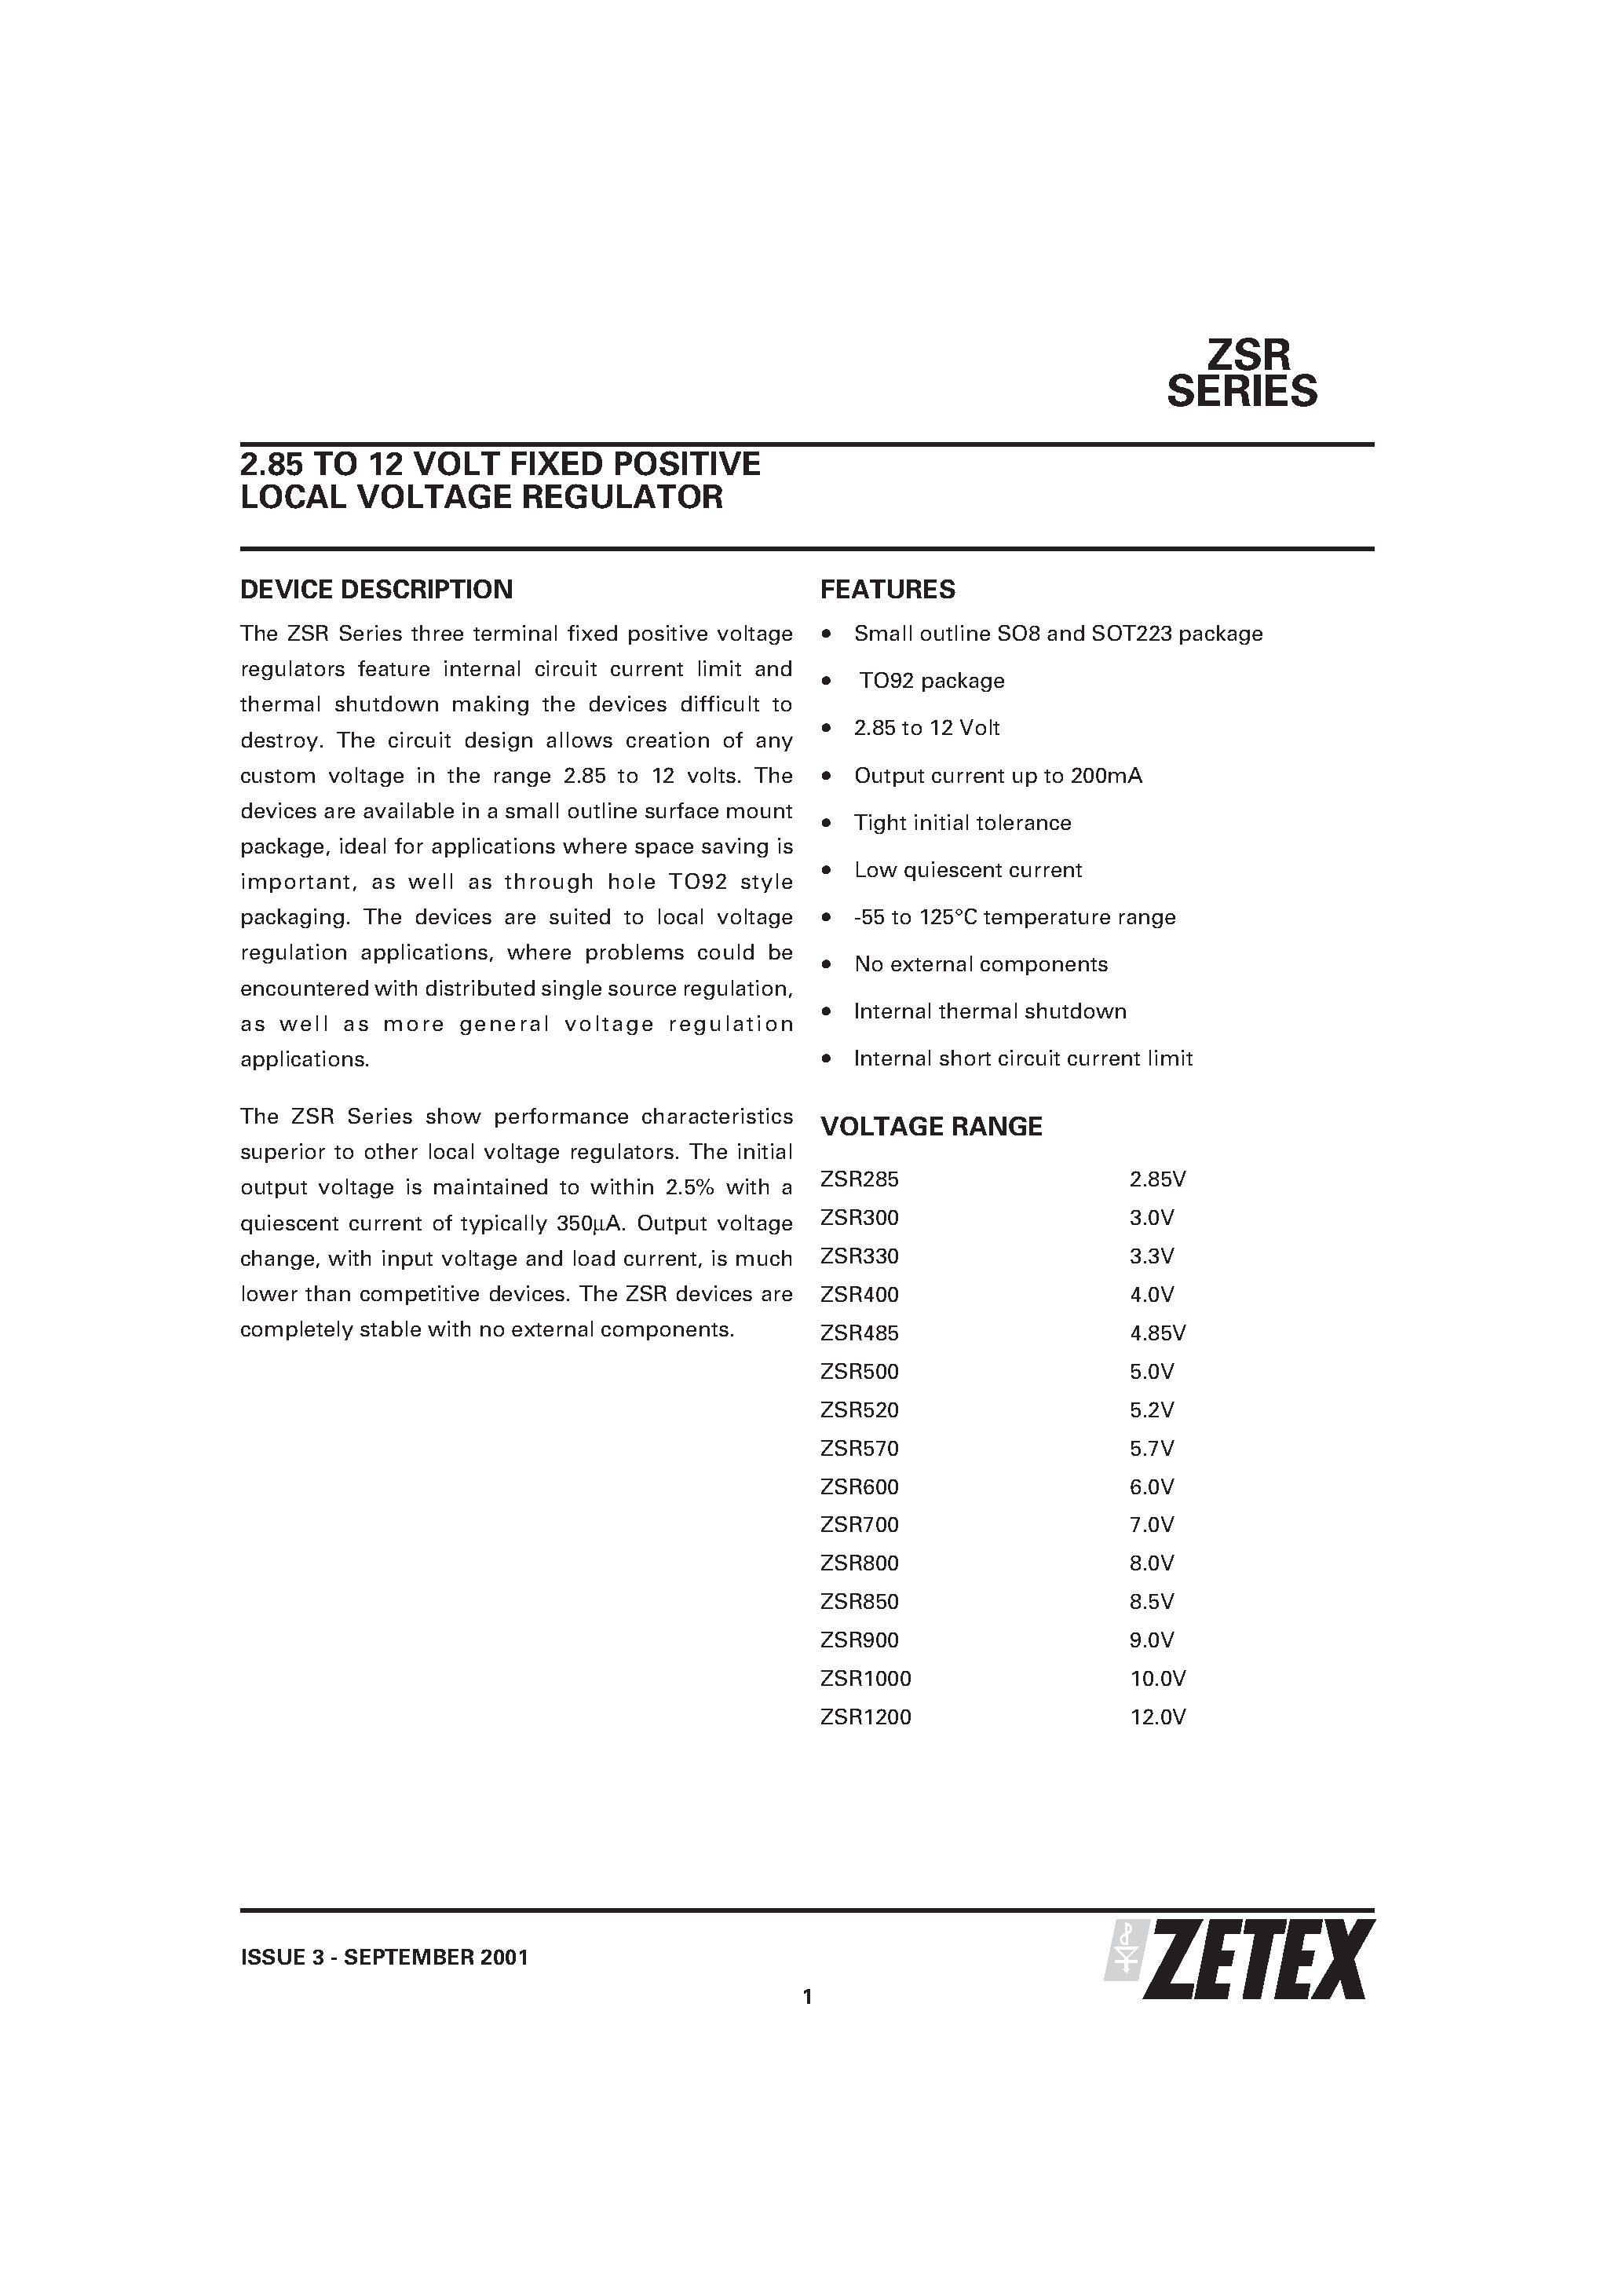 Datasheet ZSR330G - 2.85 TO 12 VOLT FIXED POSITIVE LOCAL VOLTAGE REGULATOR page 1